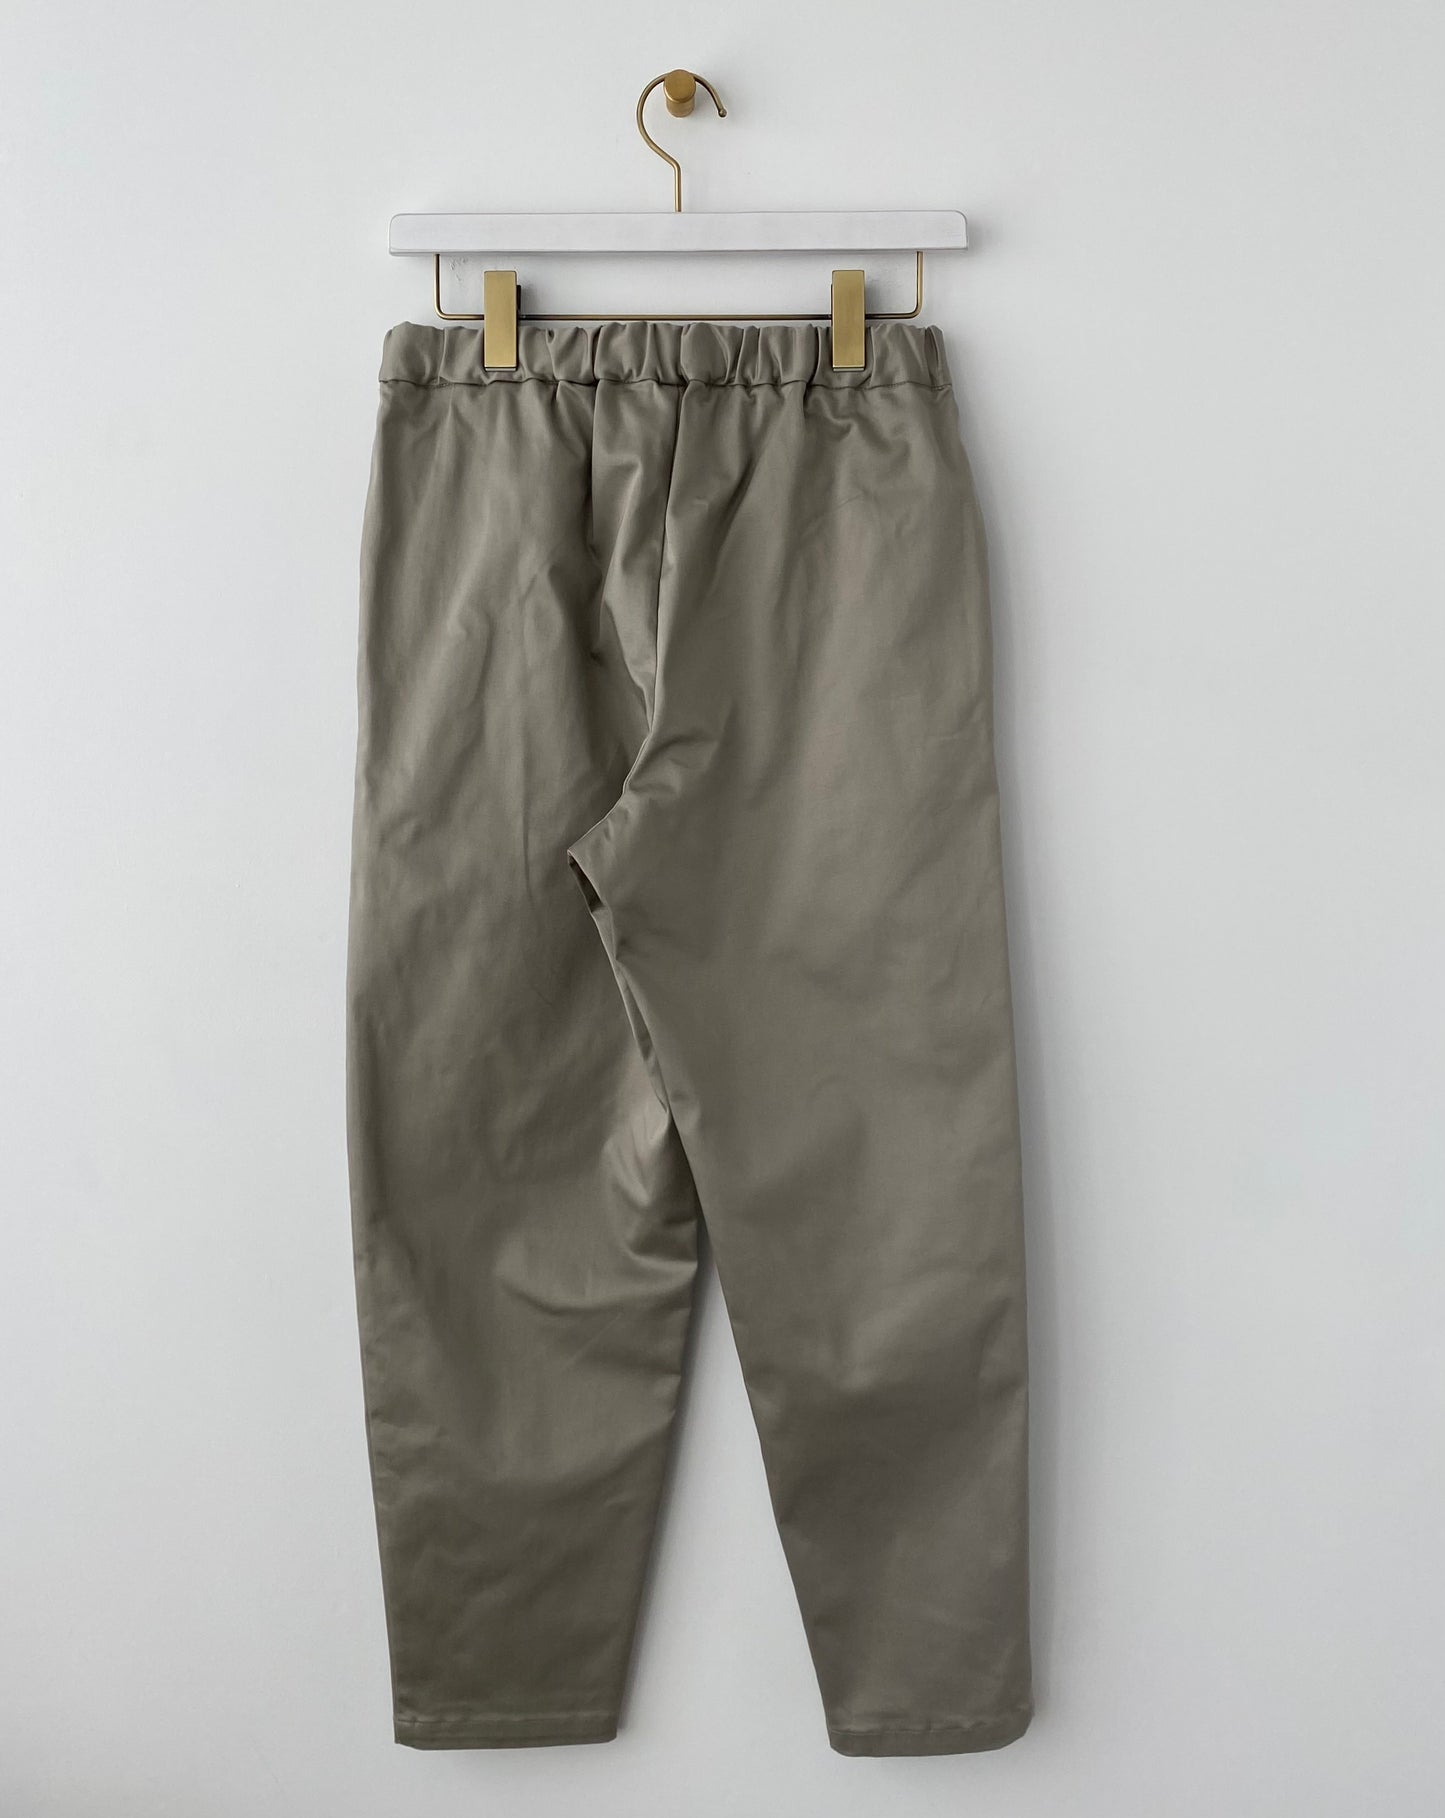 Pants　Porter des boutons　ポルテデブトン　通販